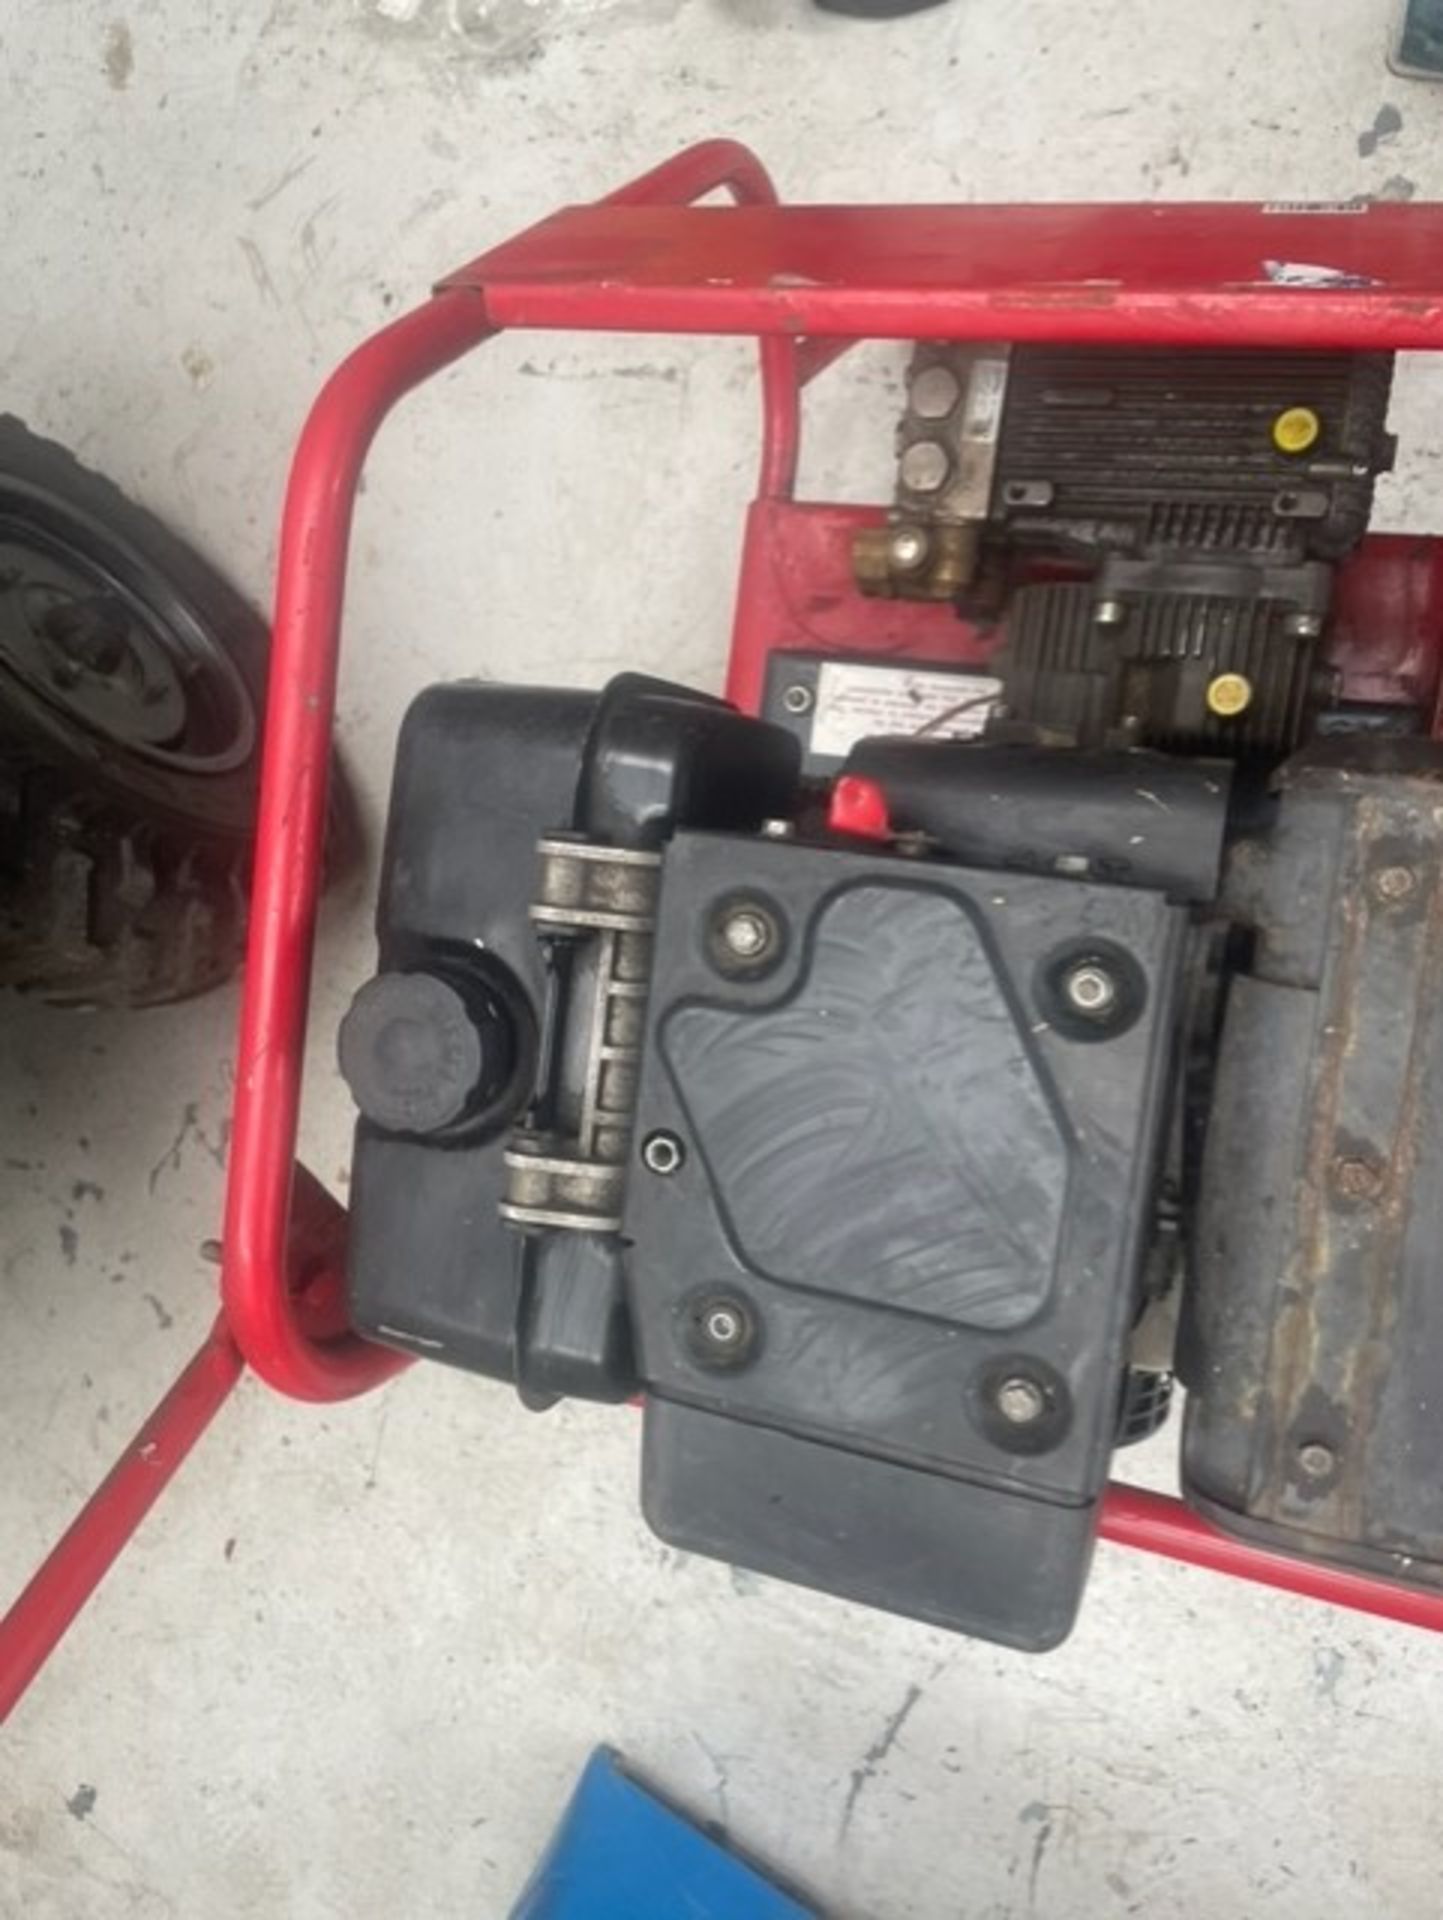 Demon diesel pressure washer running with lance and hose - Image 12 of 15